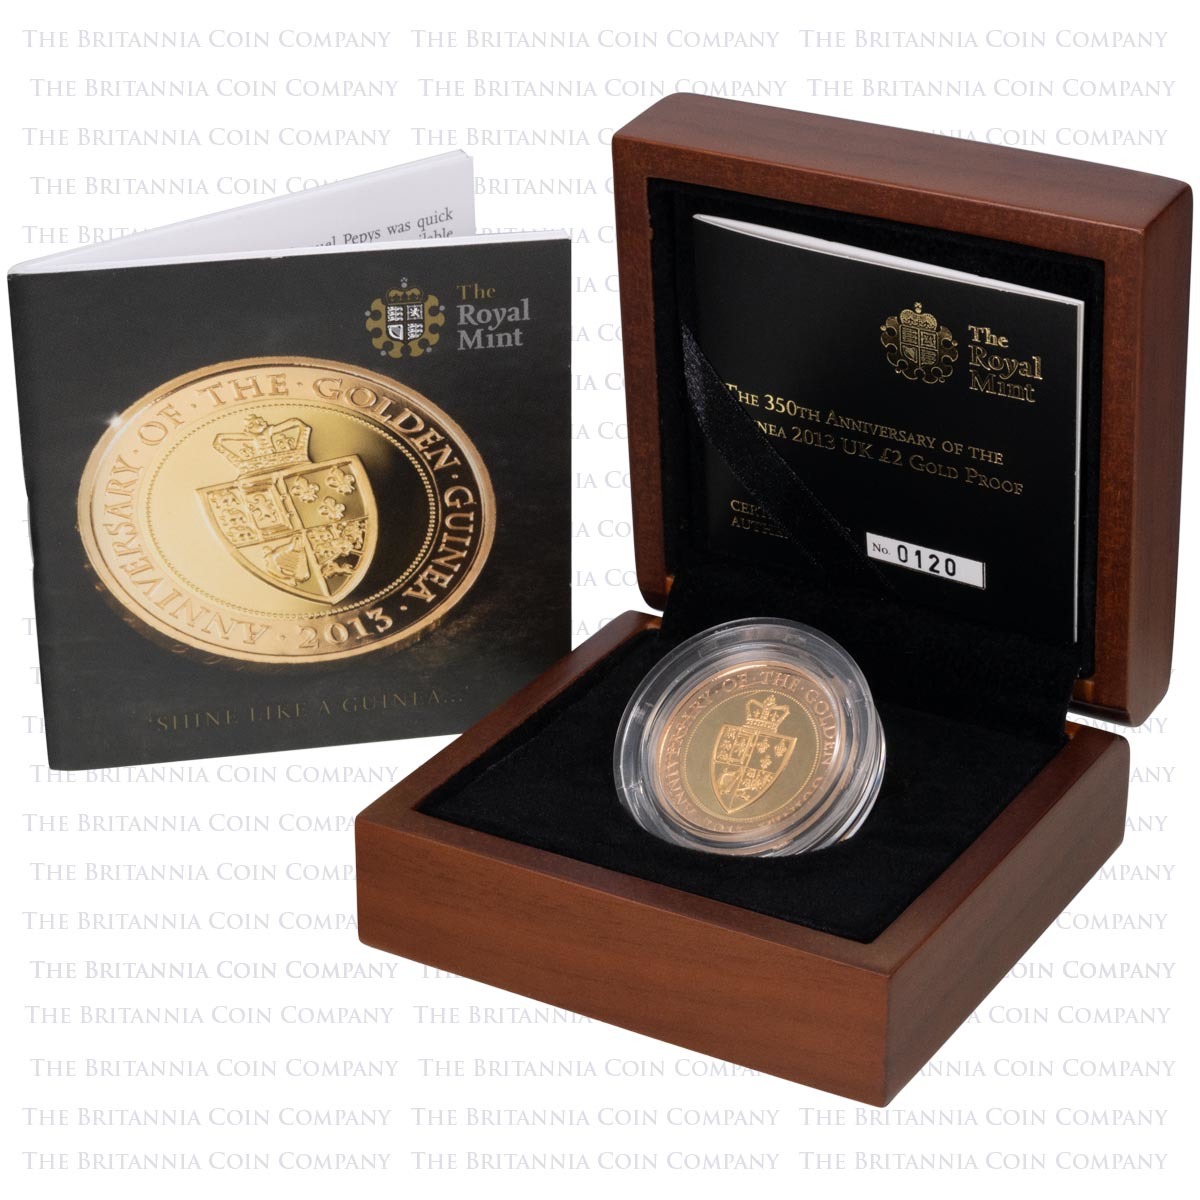 UK13GUGP 2013 Golden Guinea Two Pound Gold Proof Coin Boxed